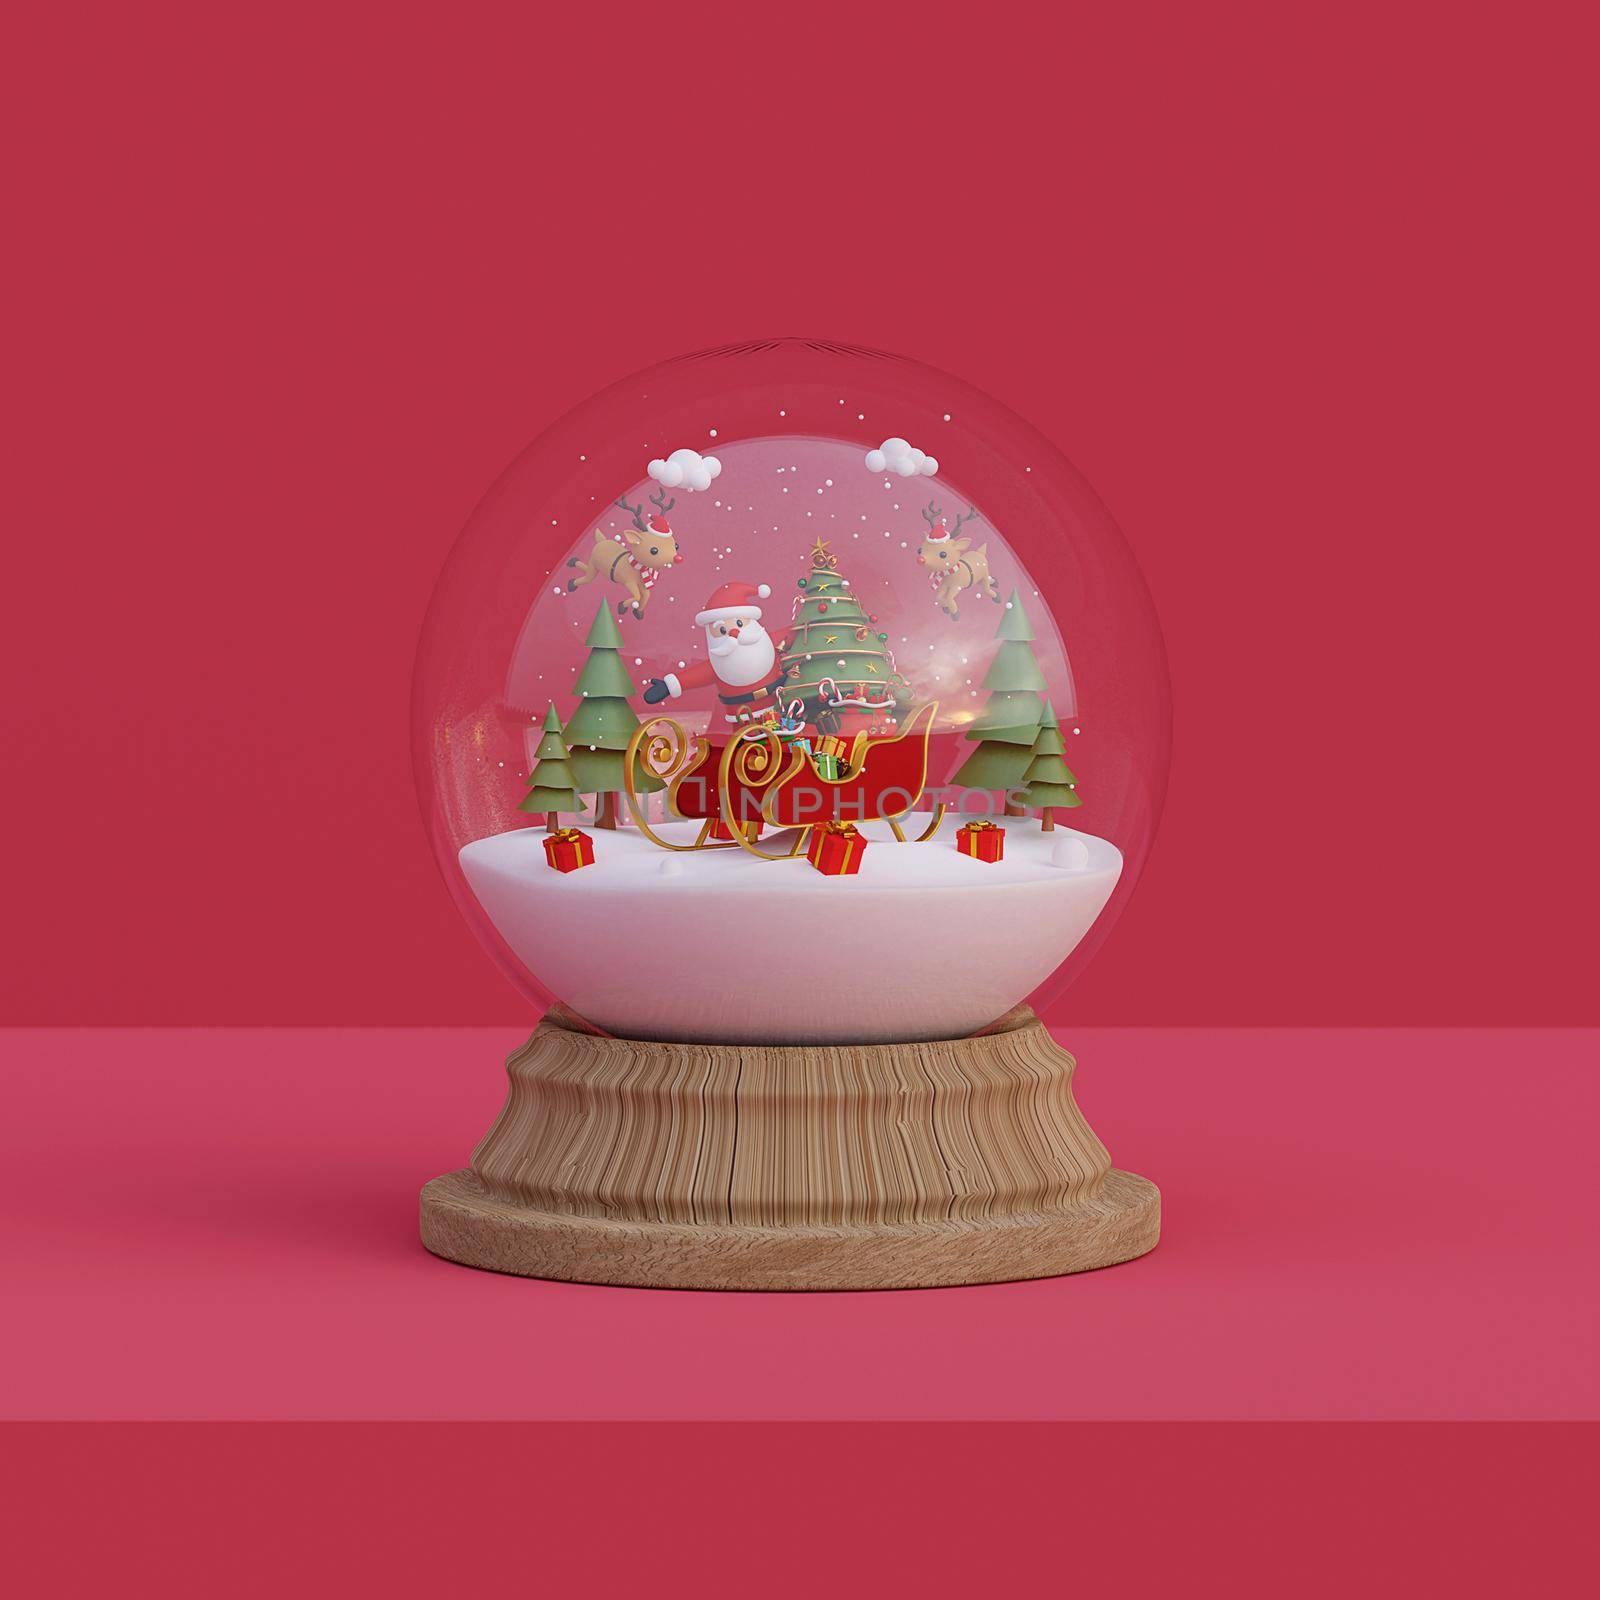 Merry Christmas and Happy New Year, Santa Claus with sleigh and reindeer in a snow globe, 3d rendering by nutzchotwarut